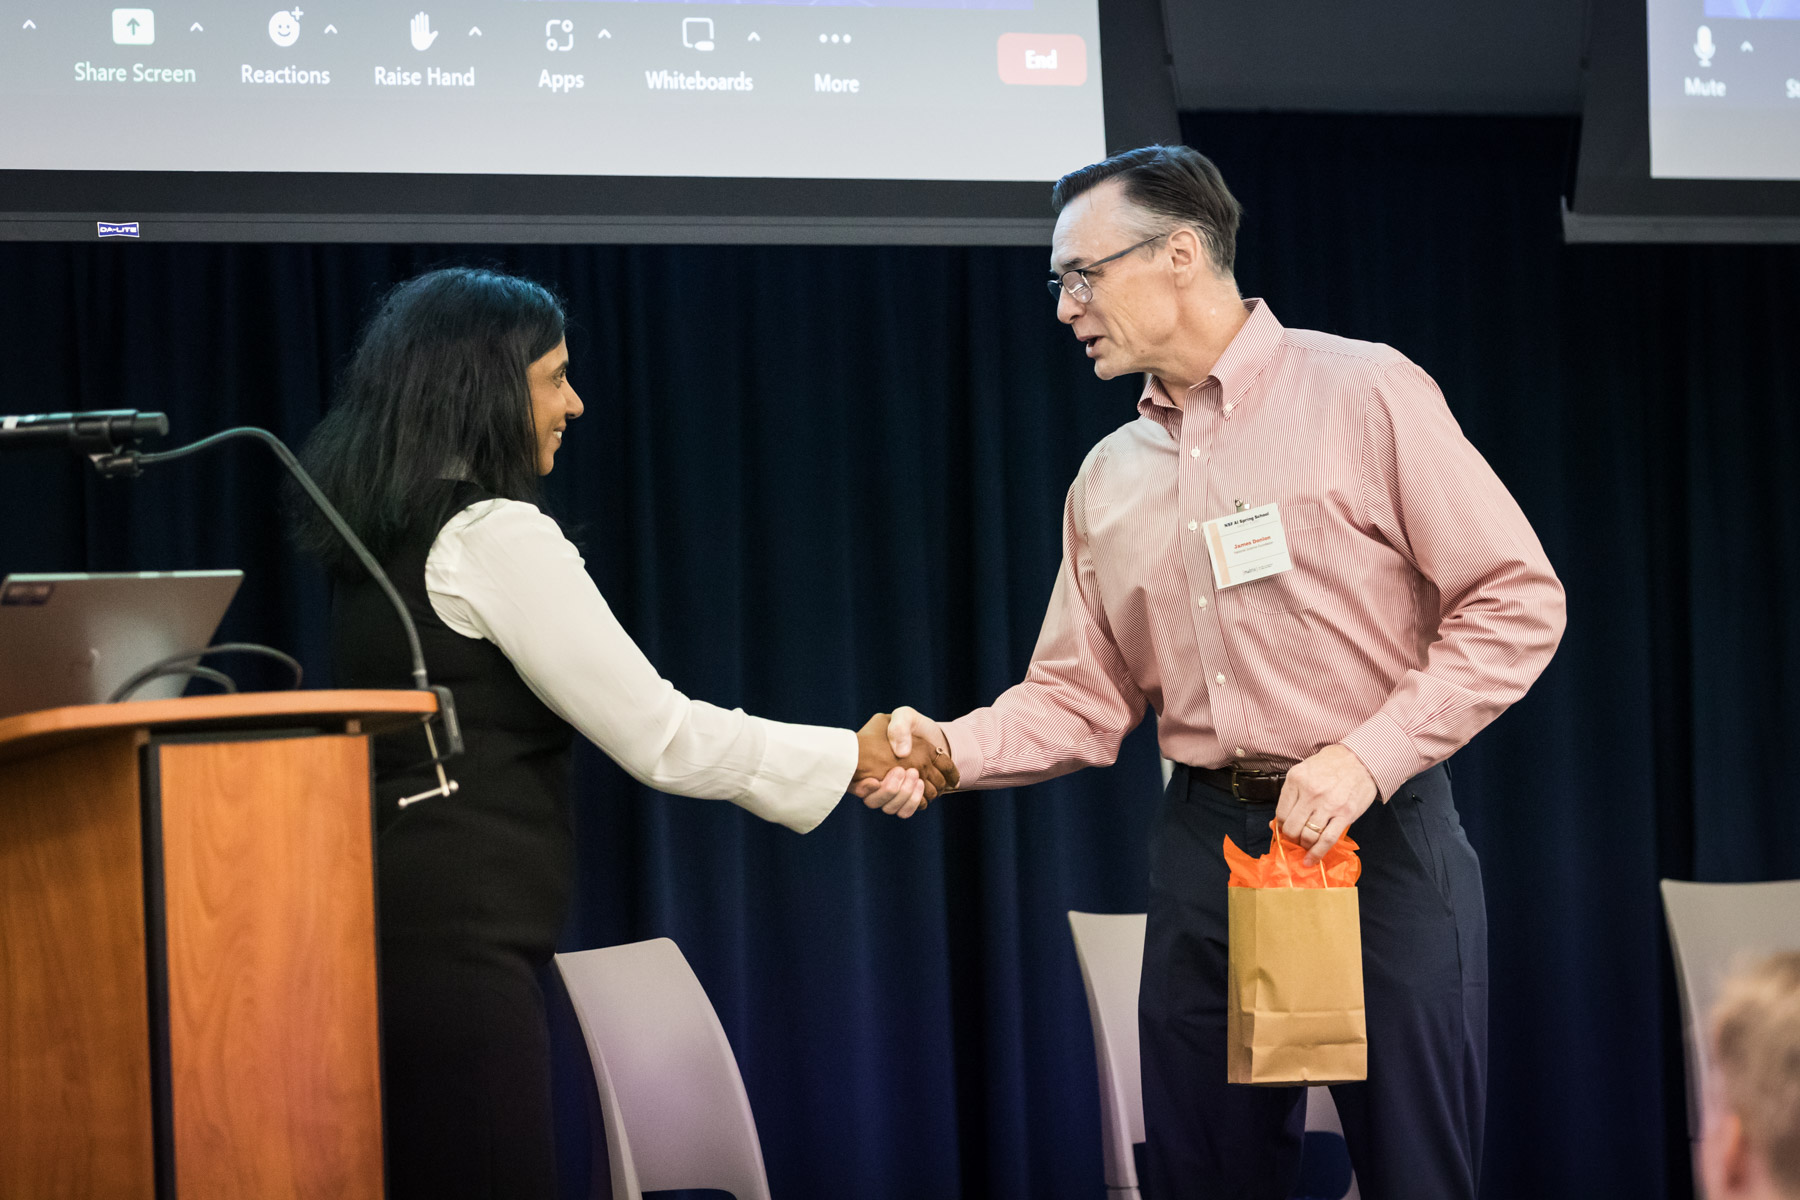 Man and woman shaking hands on stage during UTSA conference for an article on corporate event photo tips